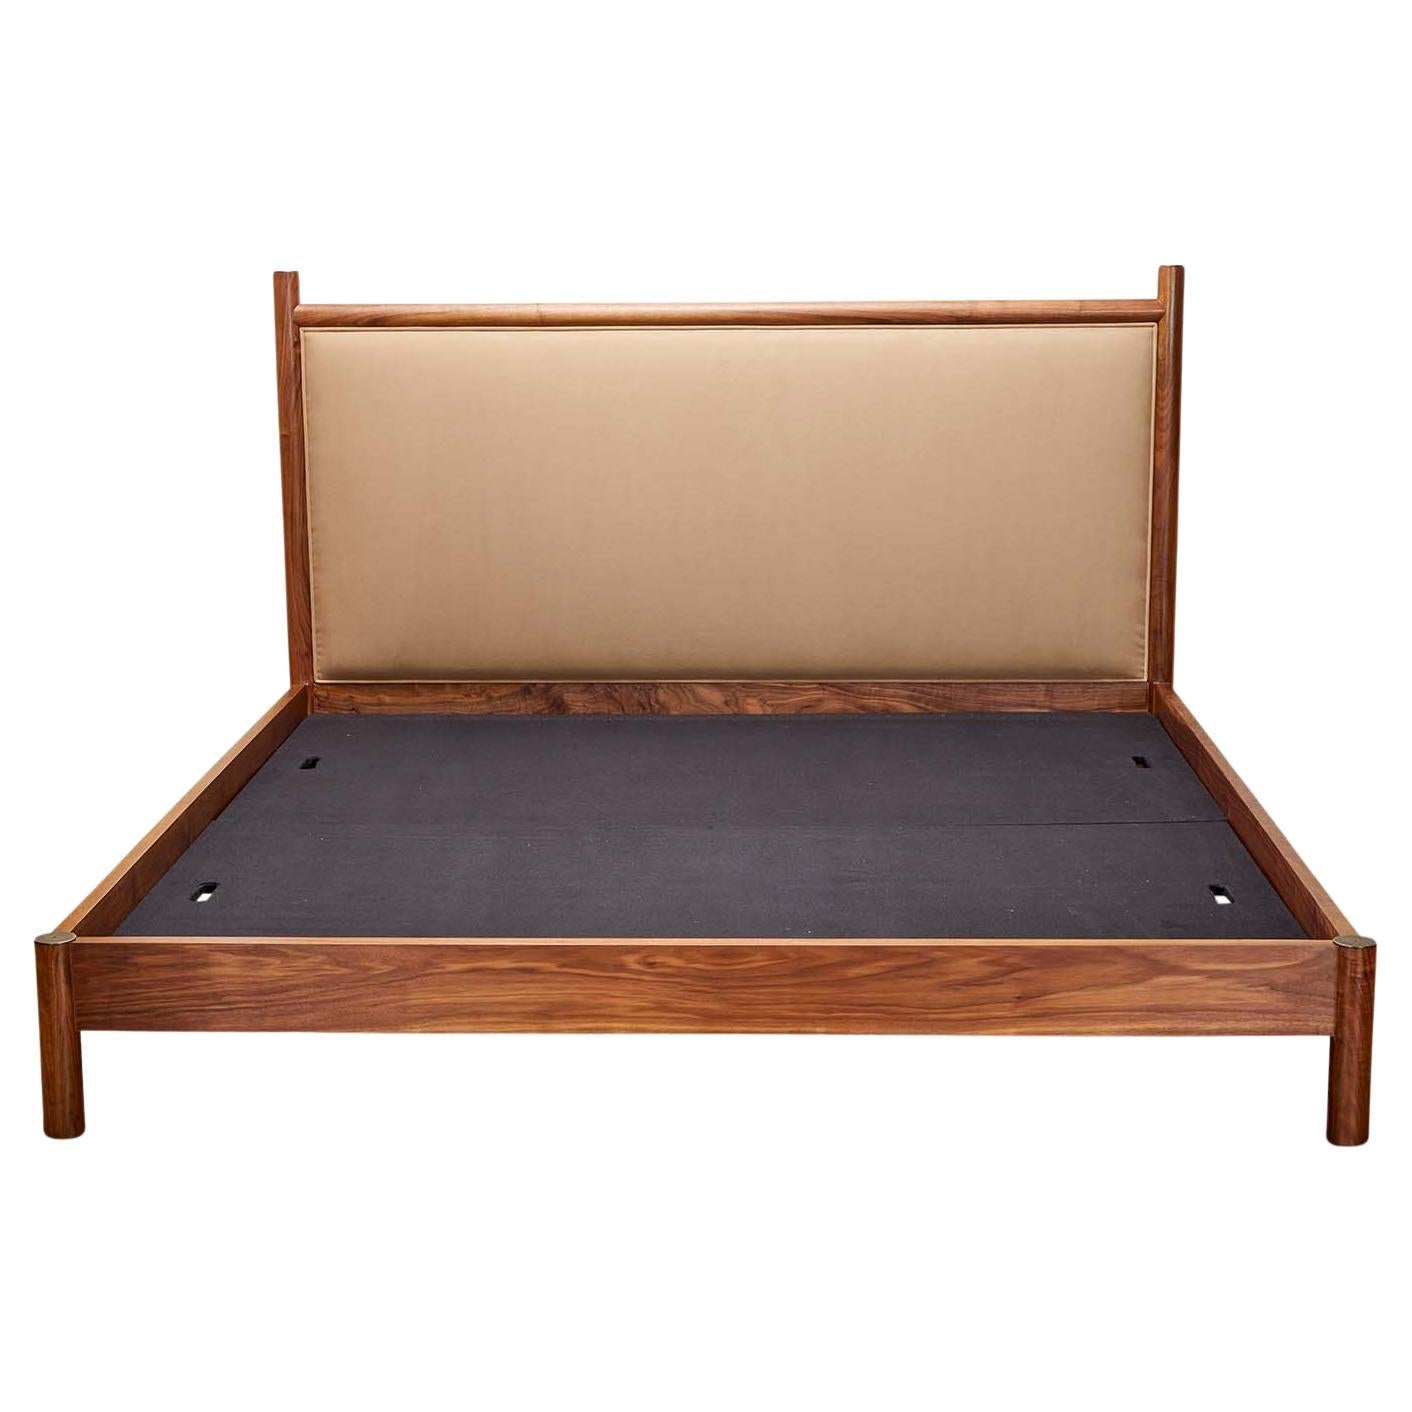 Chiselhurst Bed No Footboard by Lawson-Fenning, King